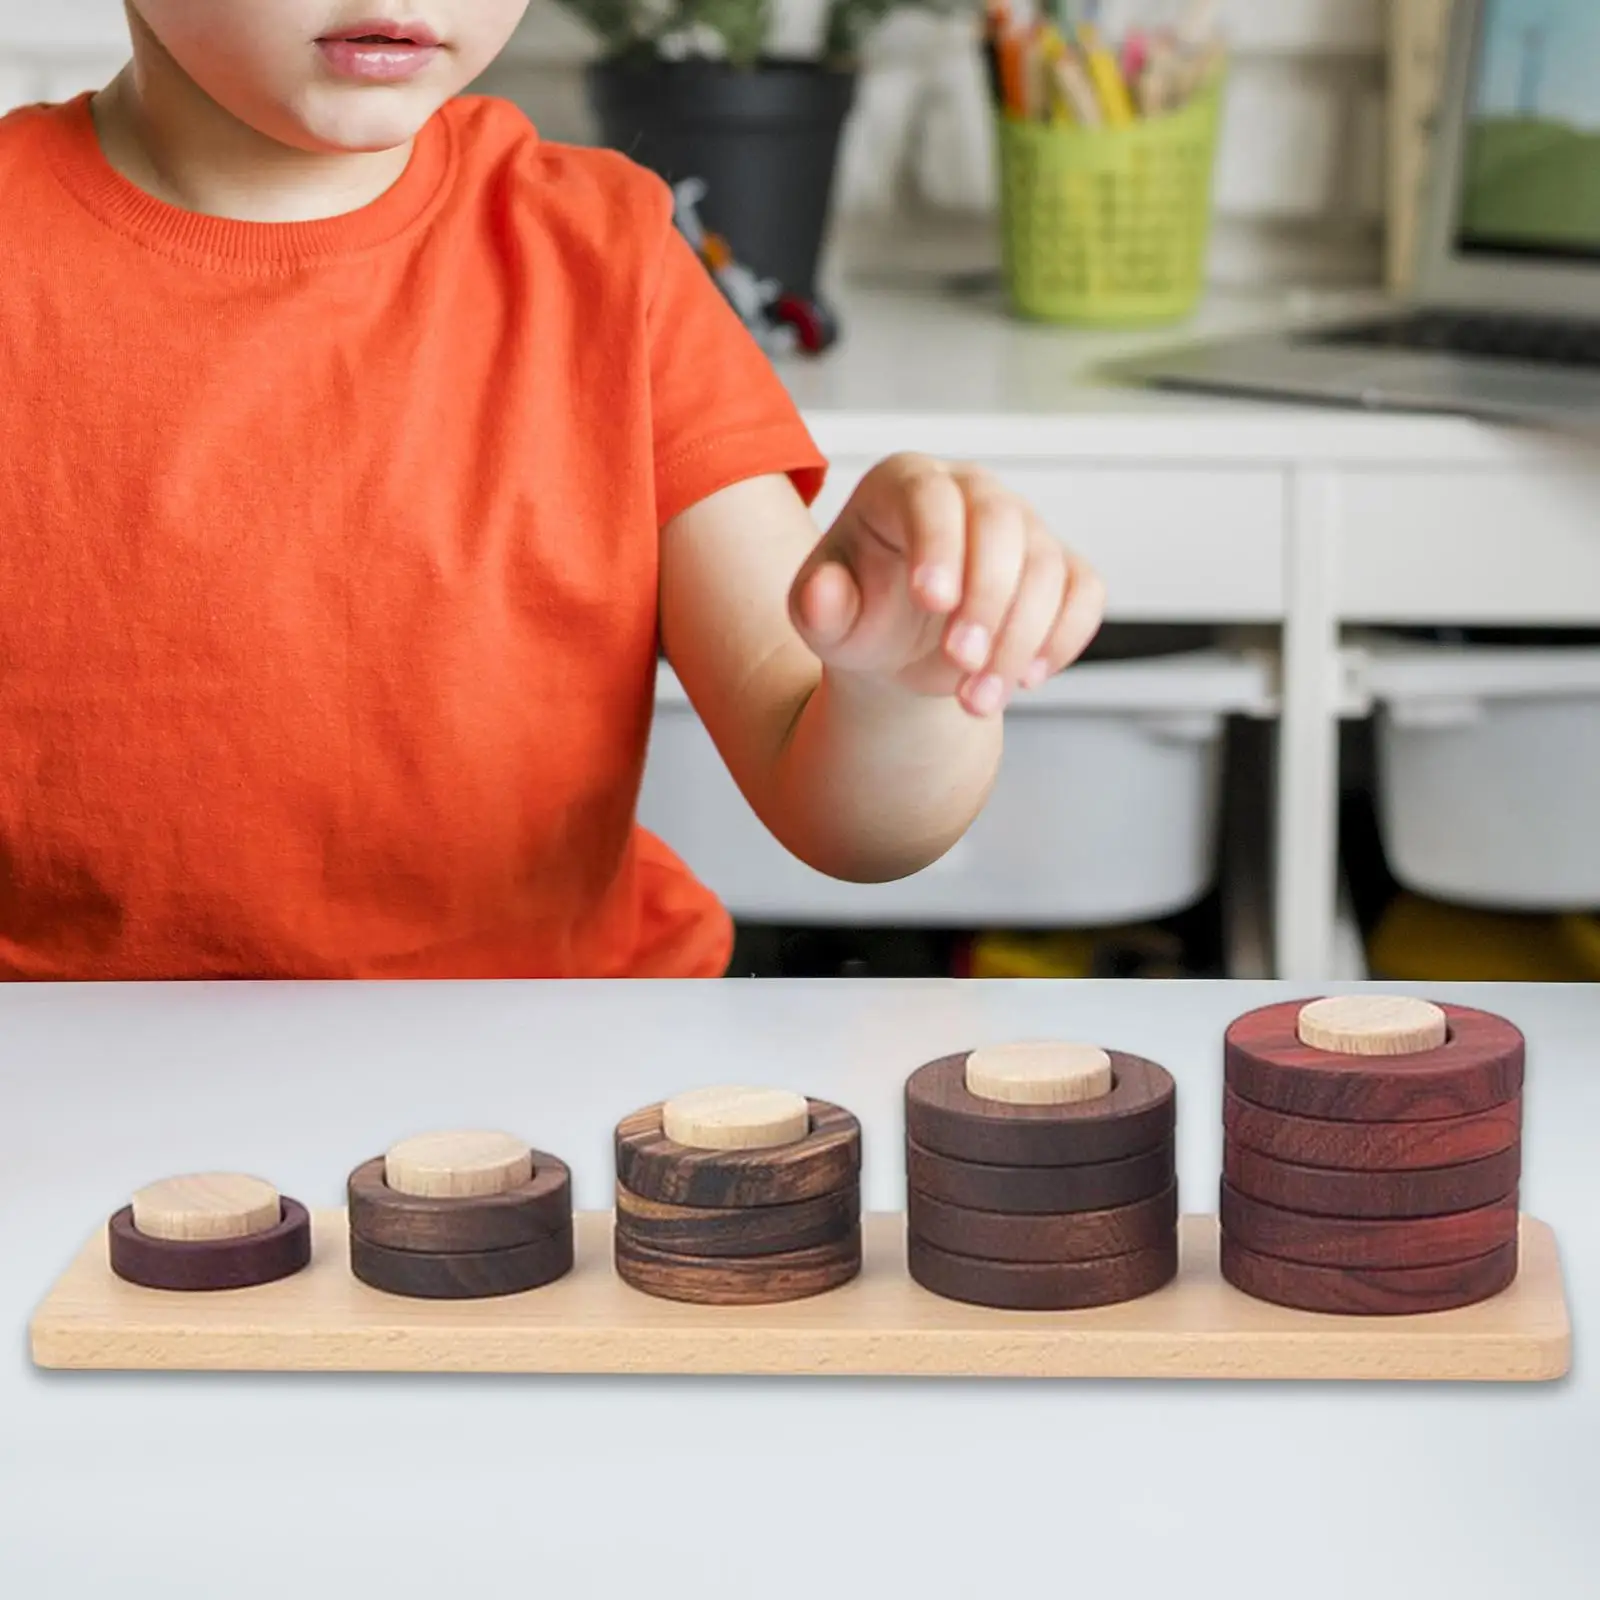 Wooden Stacking Toys Developmental Toy Develop Fine Motor Skill Early Educational Learning Toy for Kids Girls Boy Children Gift